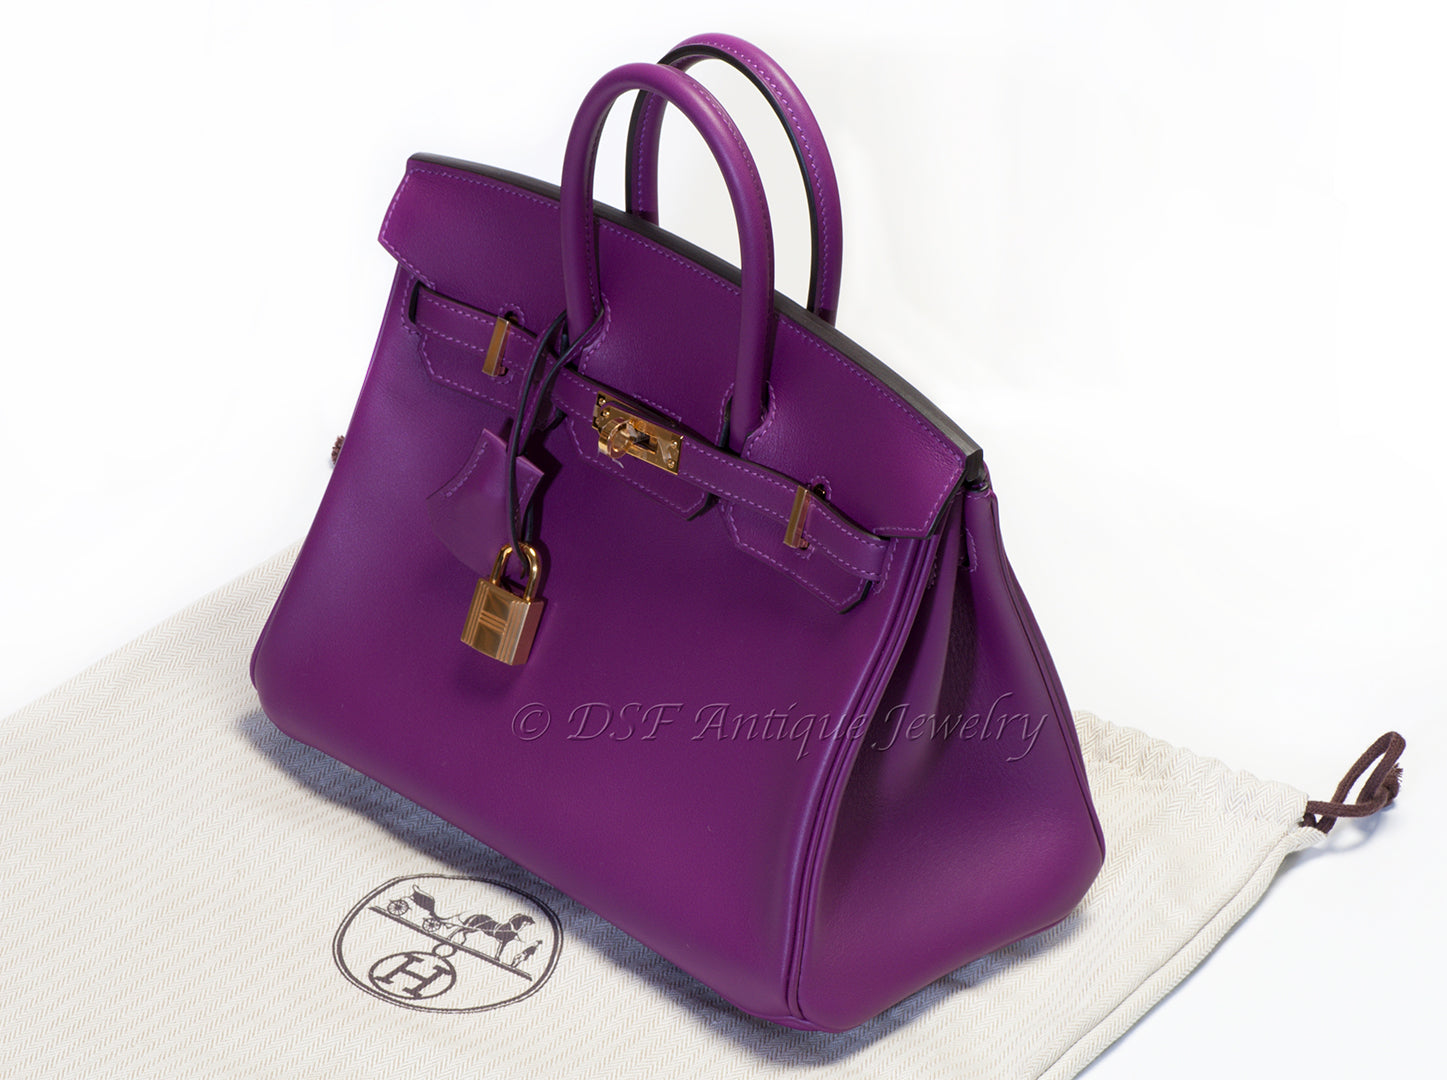 Did you know the classic Hermes Birkin was designed on a sick bag? - News